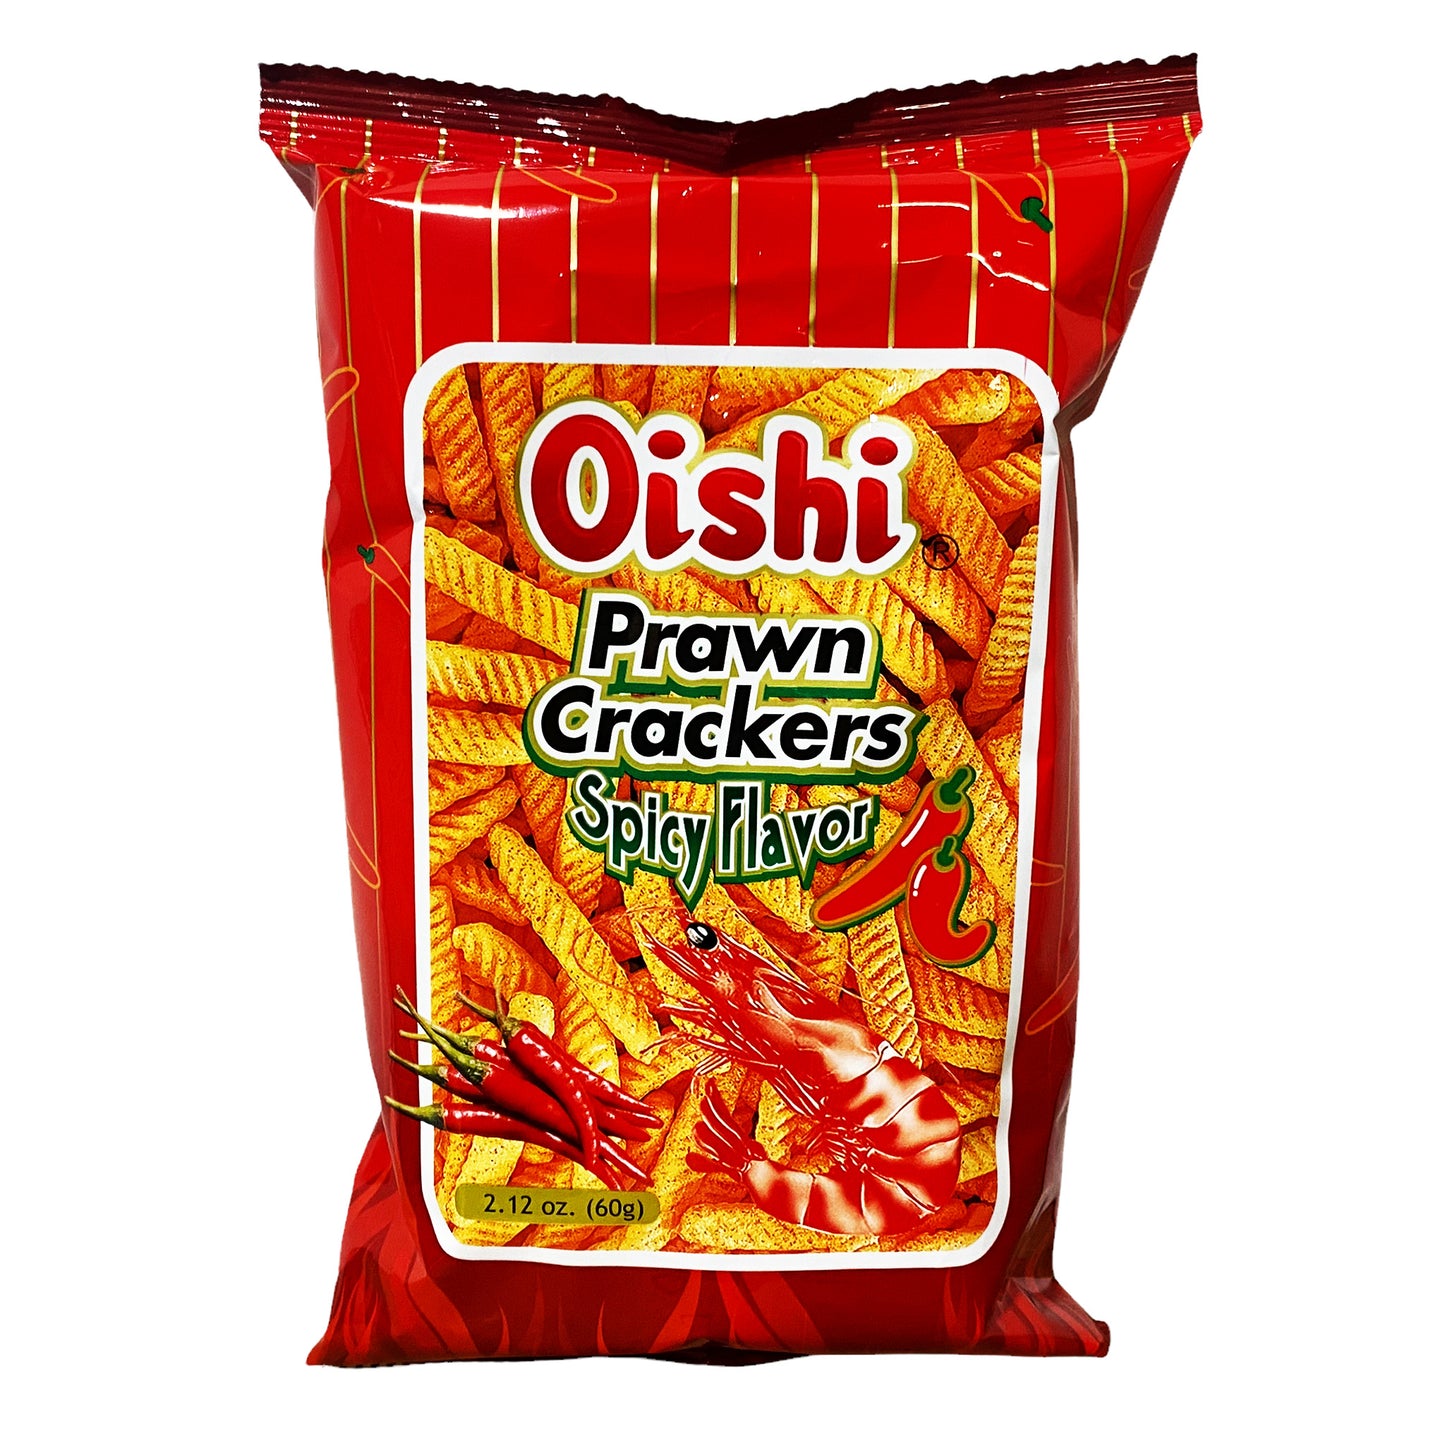 Front graphic image of Oishi Prawn Crackers Spicy Flavor 2.12oz